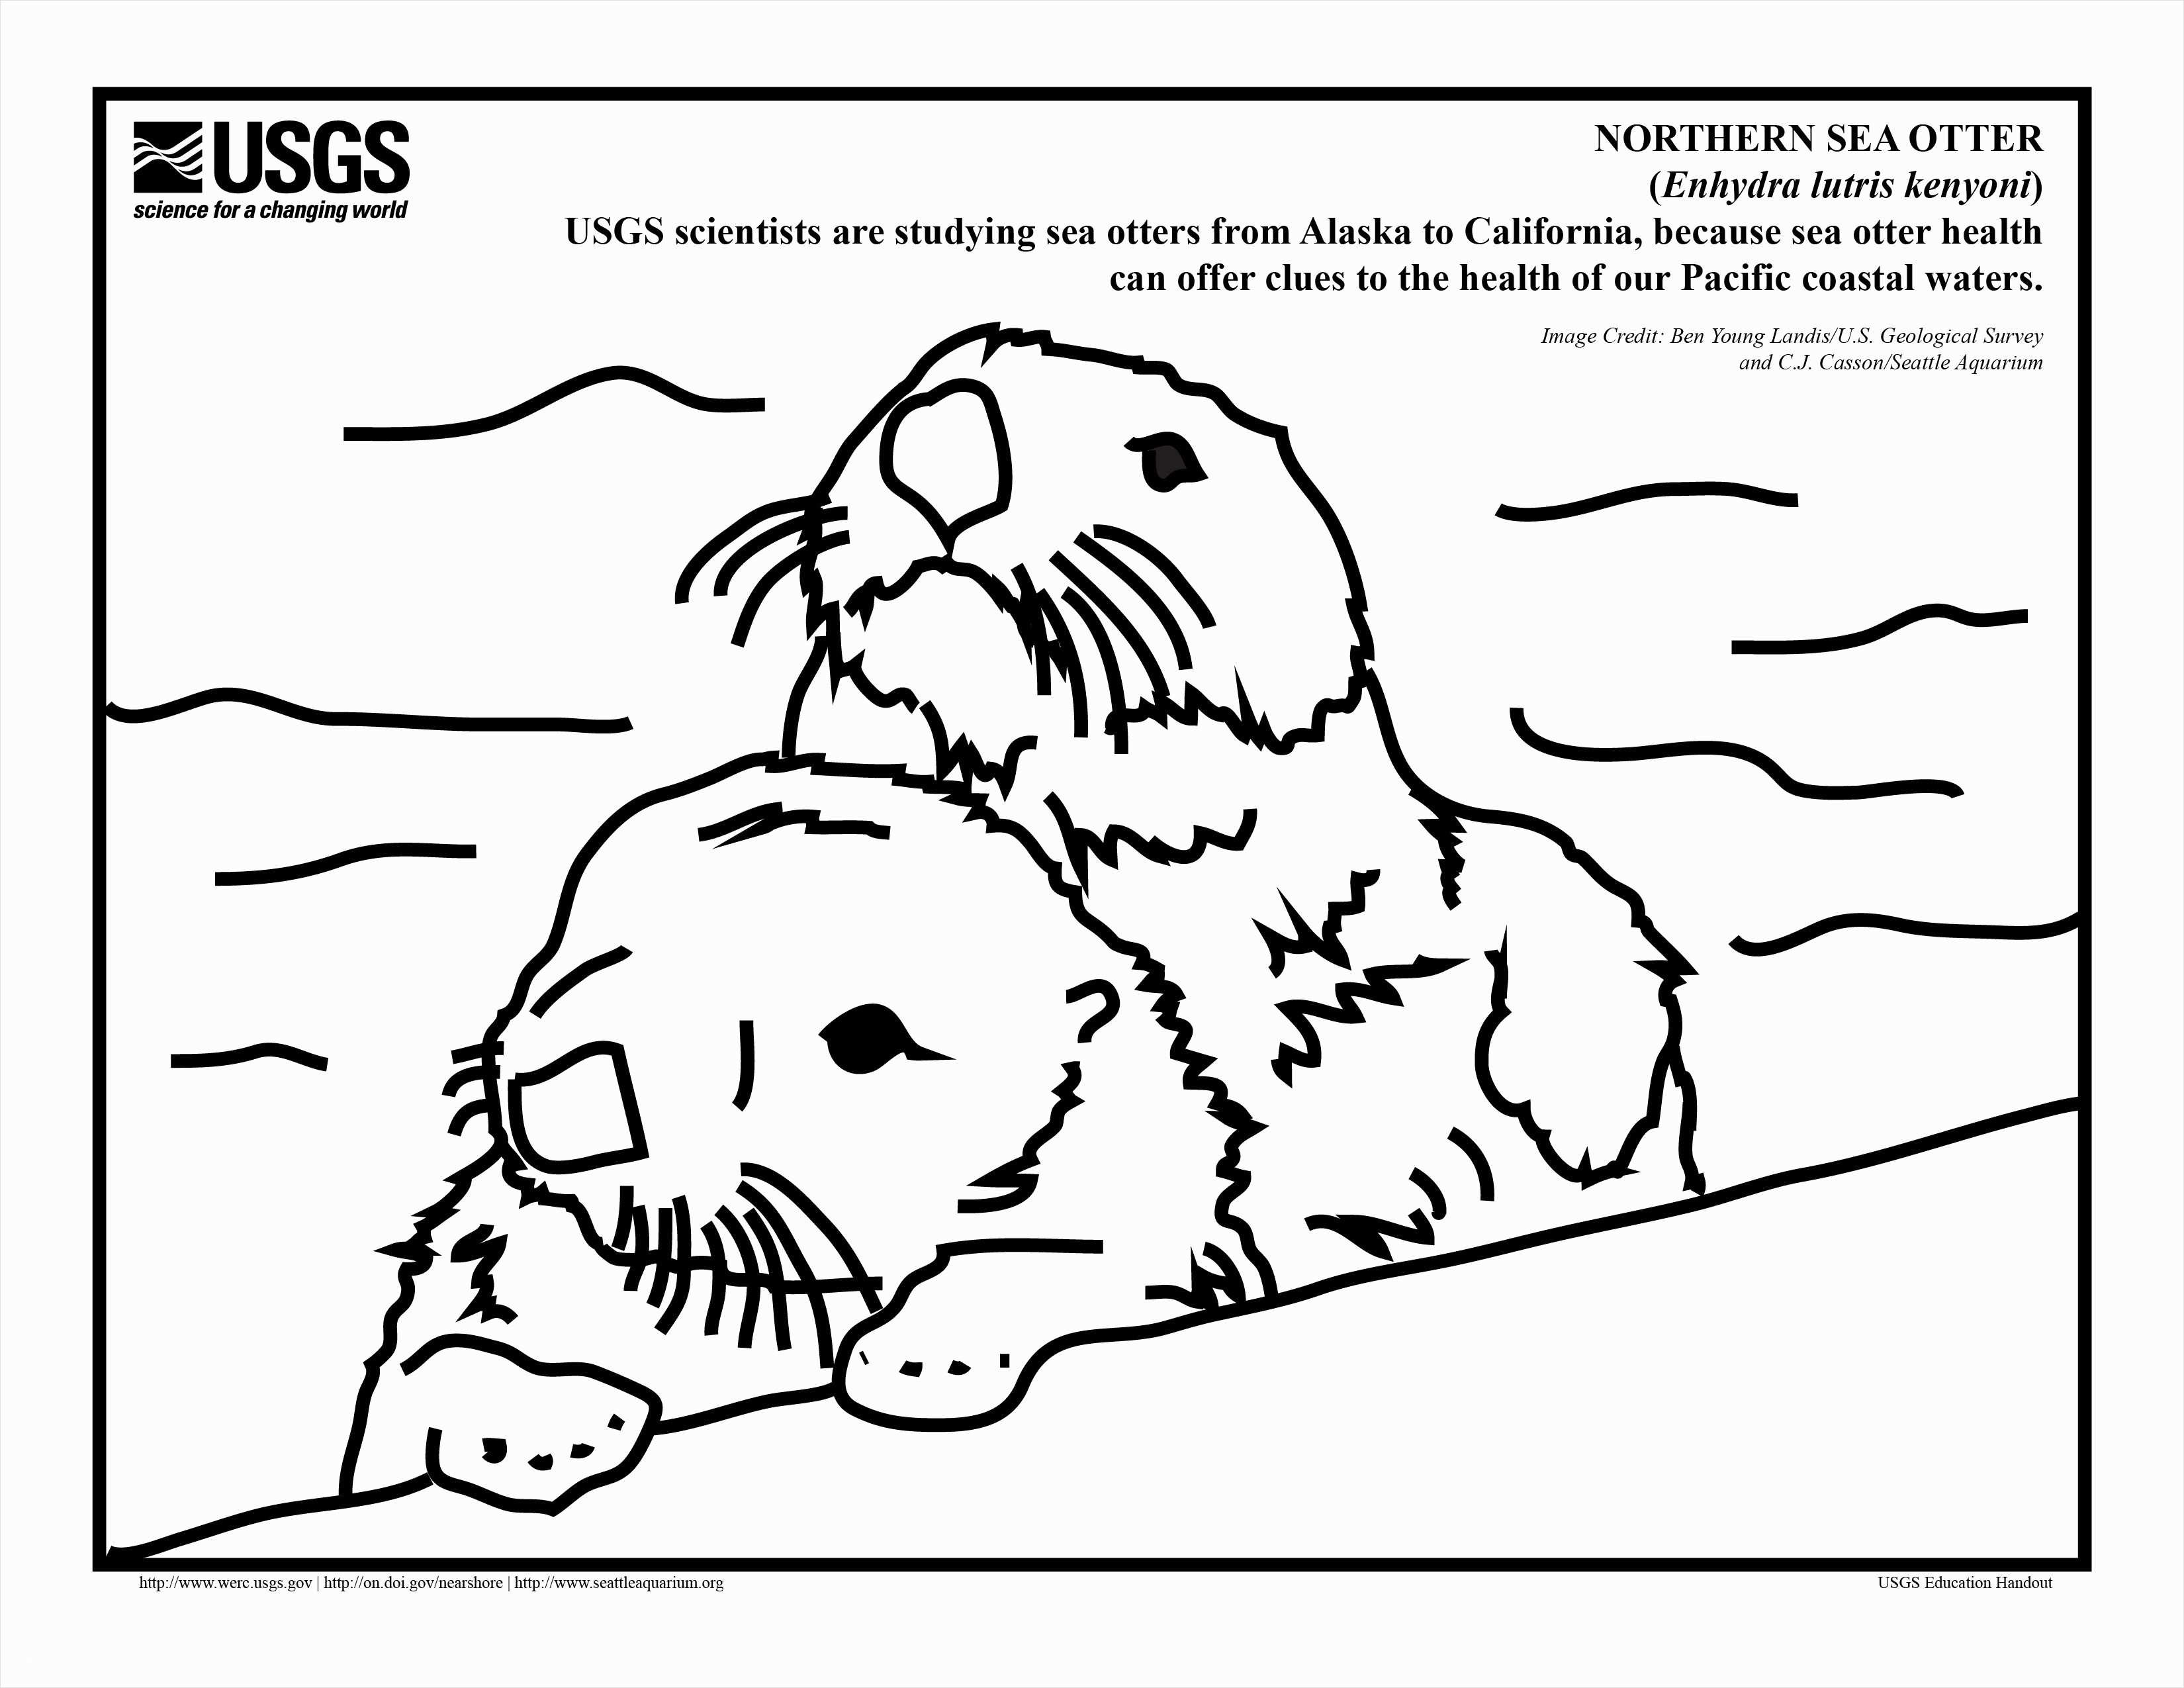 Aquarium Coloring Pages Coloring Otter Coloring Pages Aquarium Inspirational New Owl To